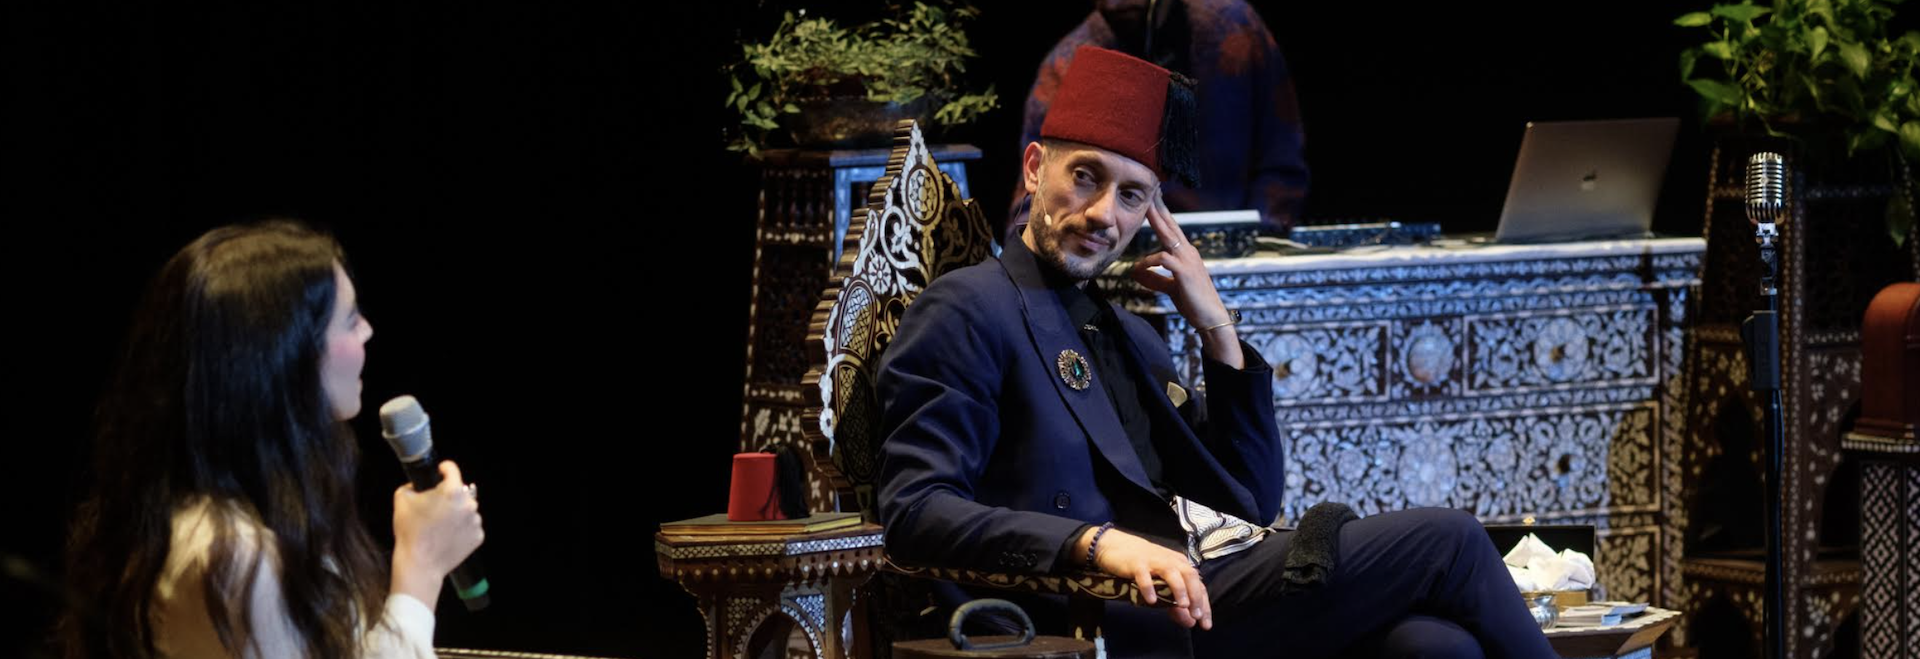 Muslim Narrative Change Fellow Omar Offendum wearing a red fez and sitting in an intricately carved wooden chair on stage with Pillars Managing Director Arij Mikati